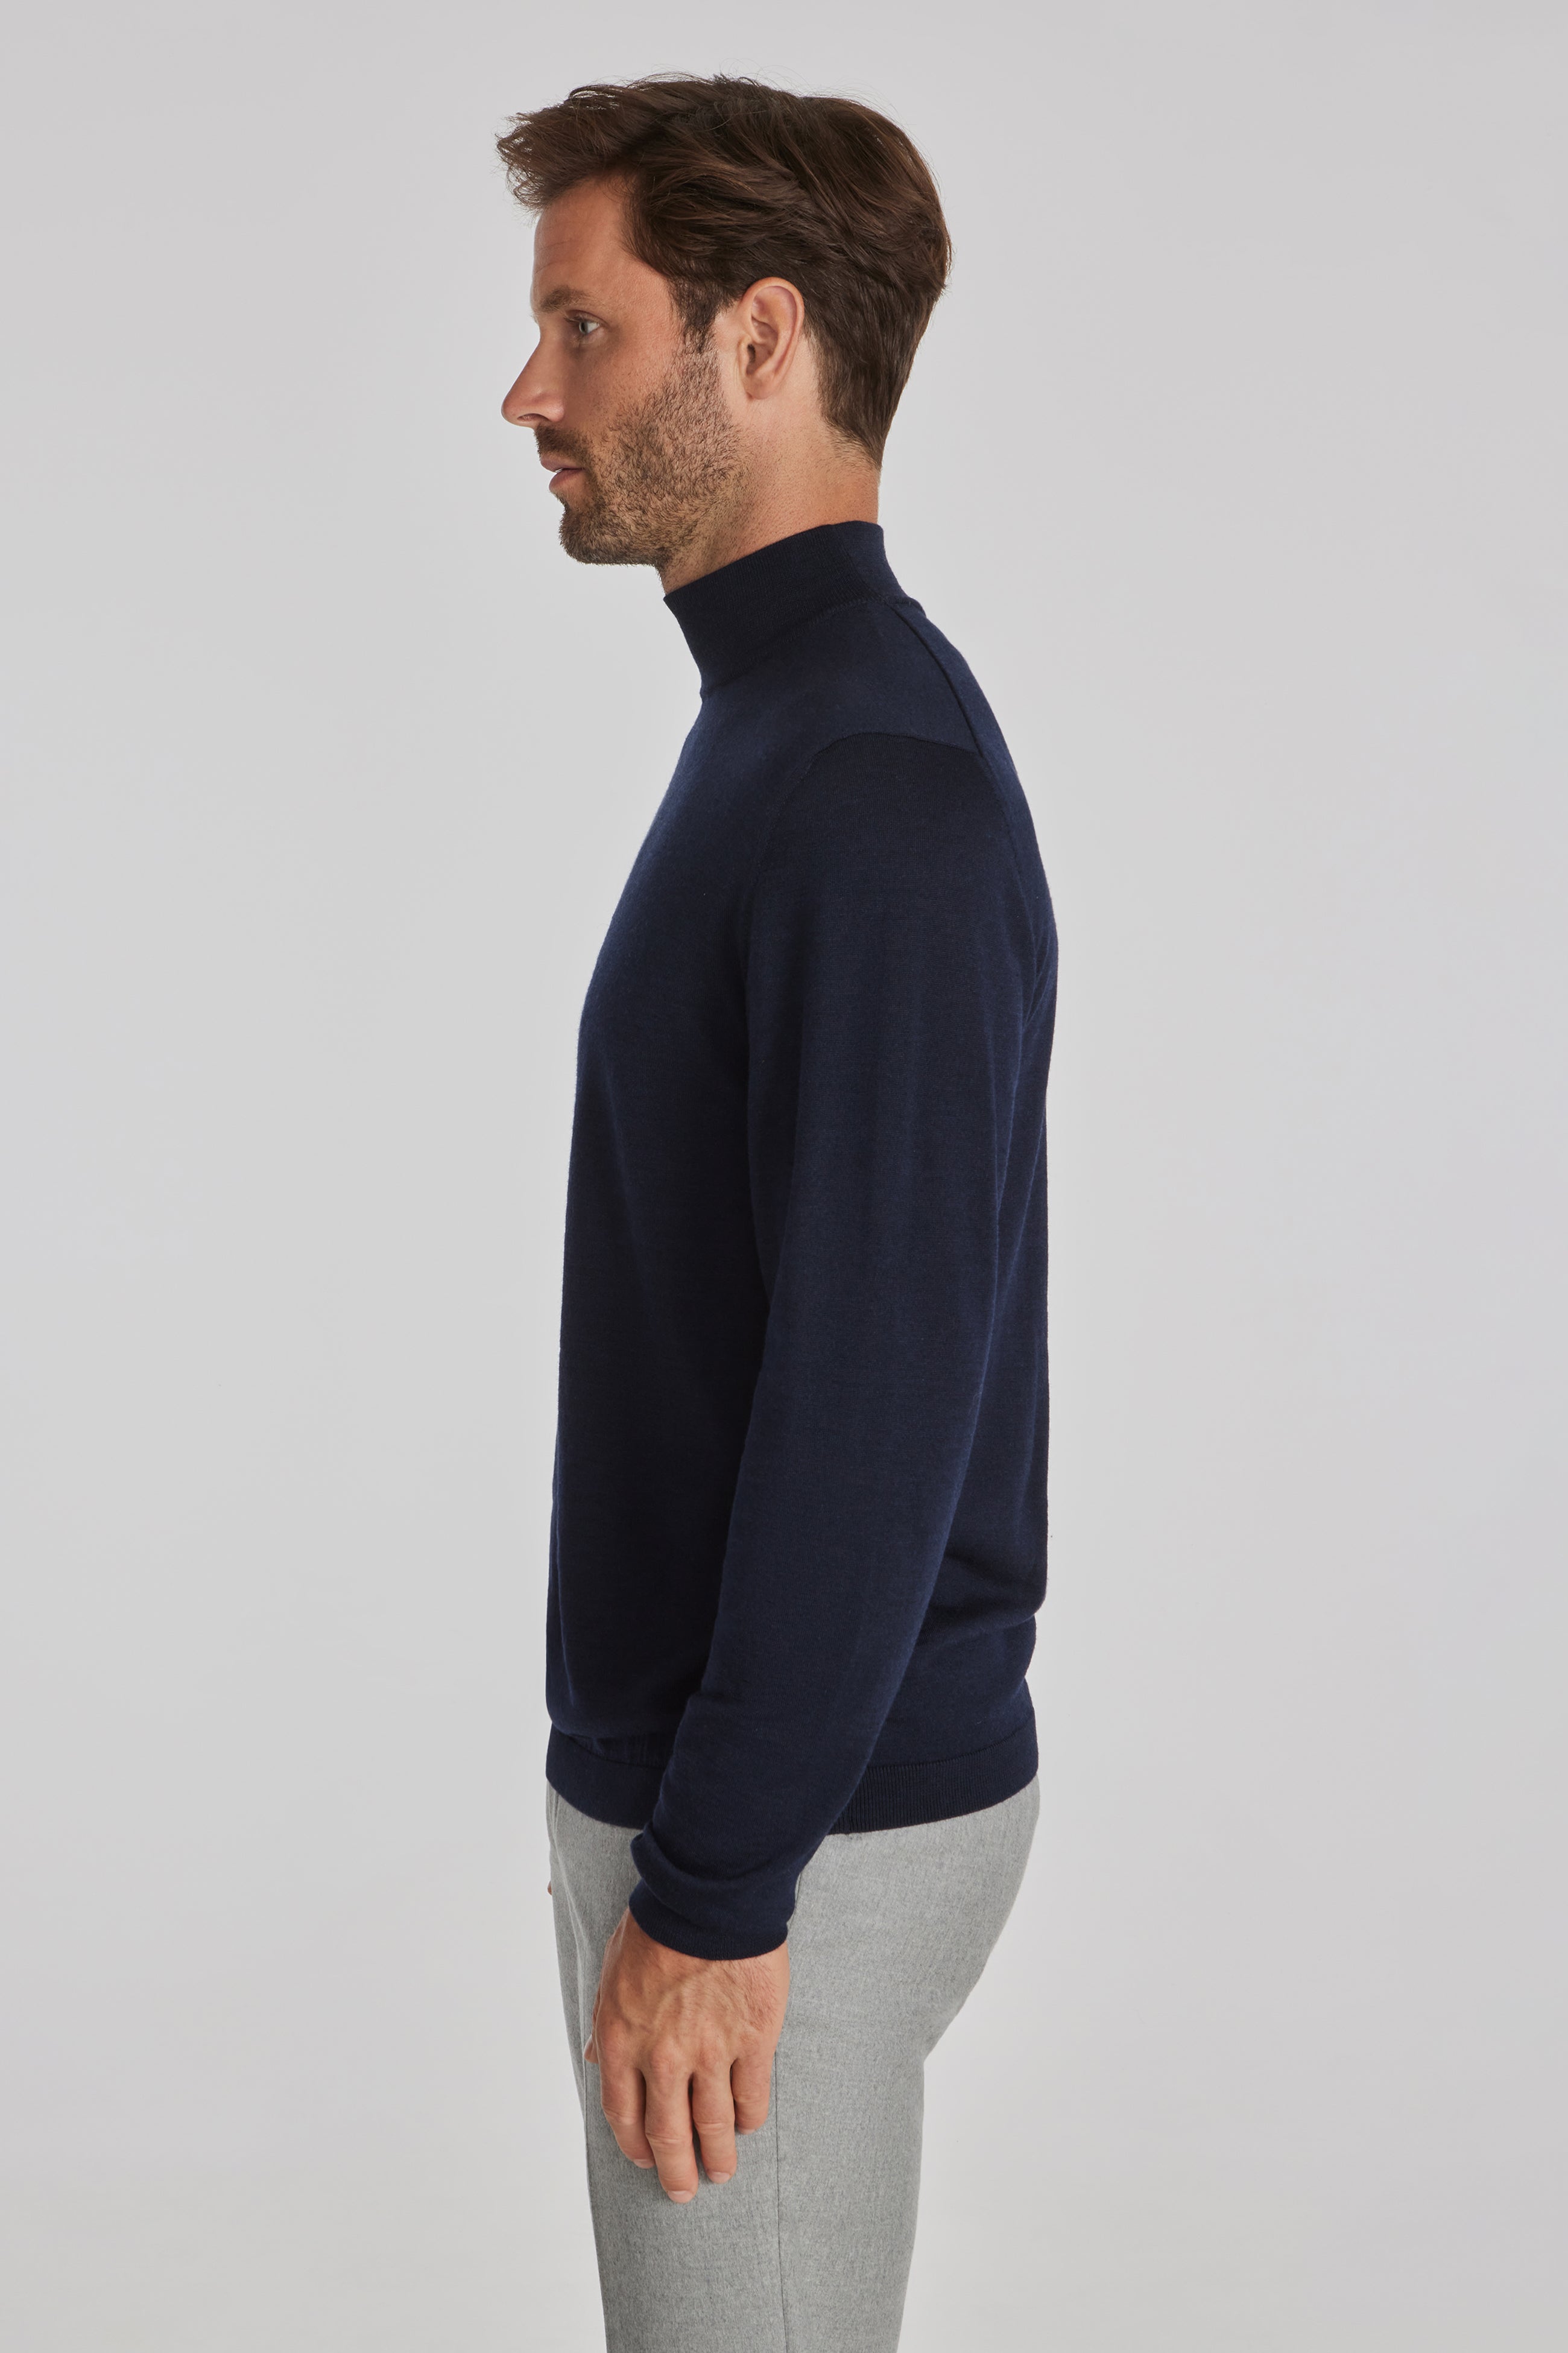 Alt view 2 Beaudry Wool, Silk and Cashmere Mock Neck Sweater in Navy